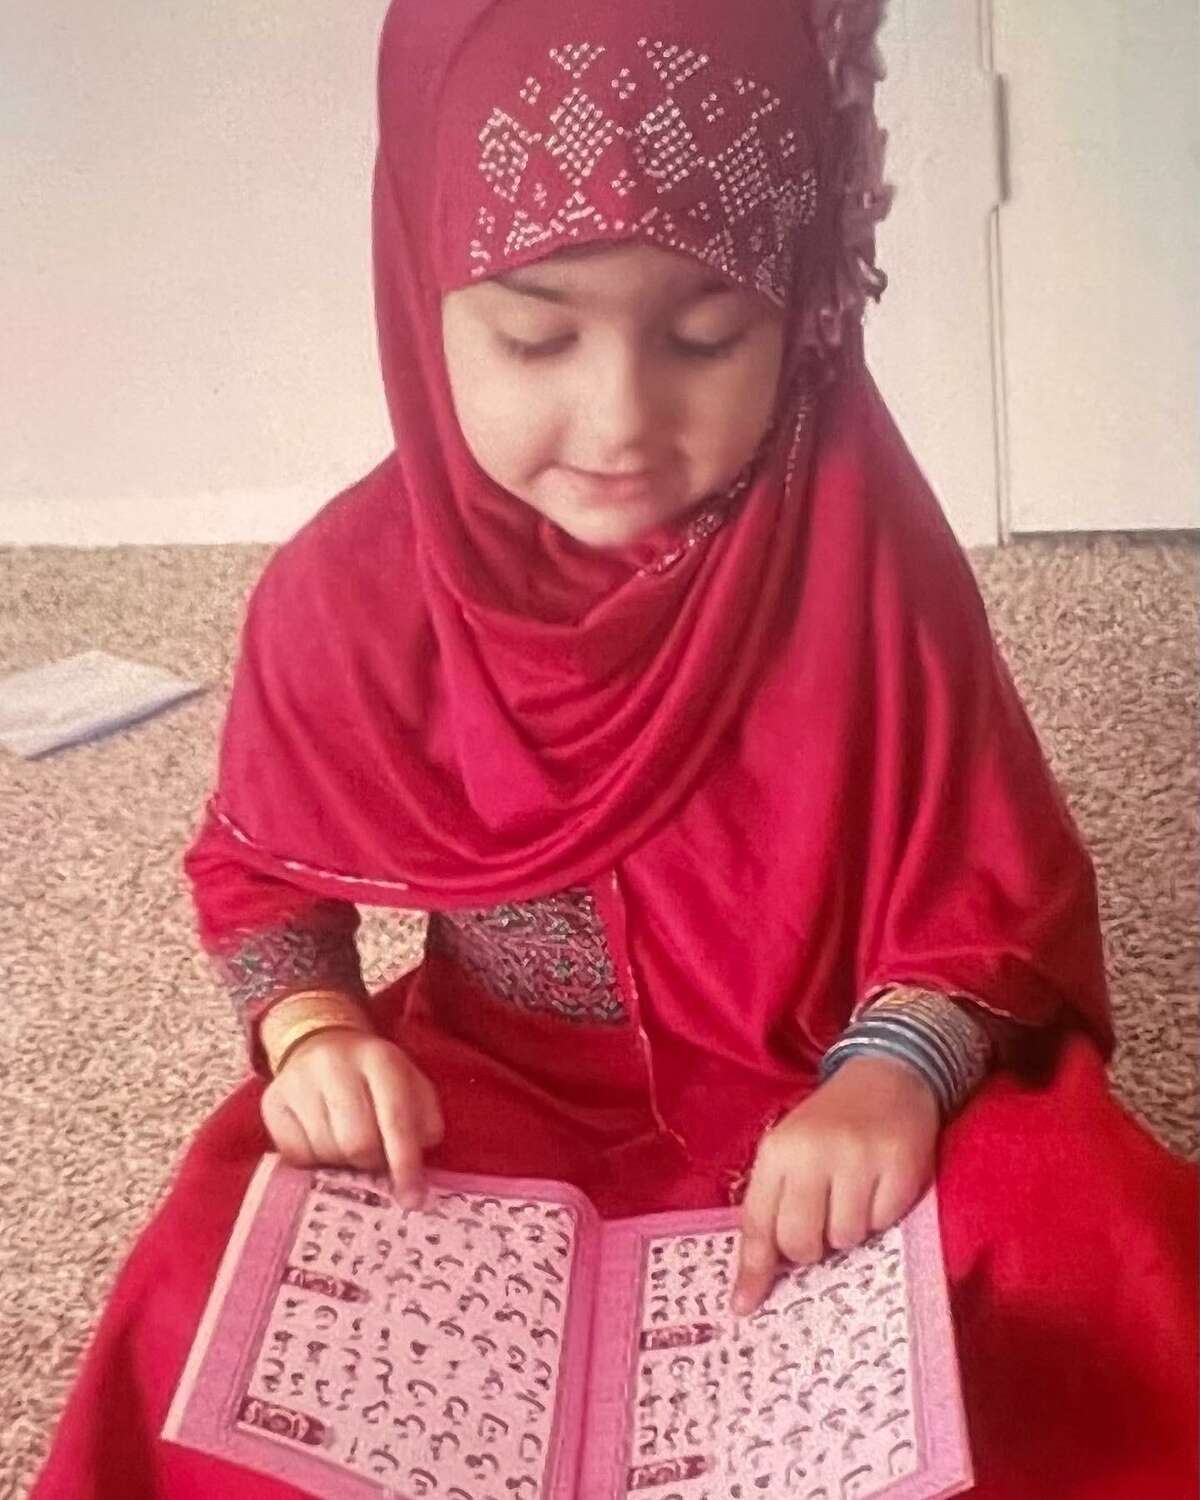 Lina Sardar Khil, 3, and her family came to the United States from Afghanistan in 2019. She was reported missing Monday evening.